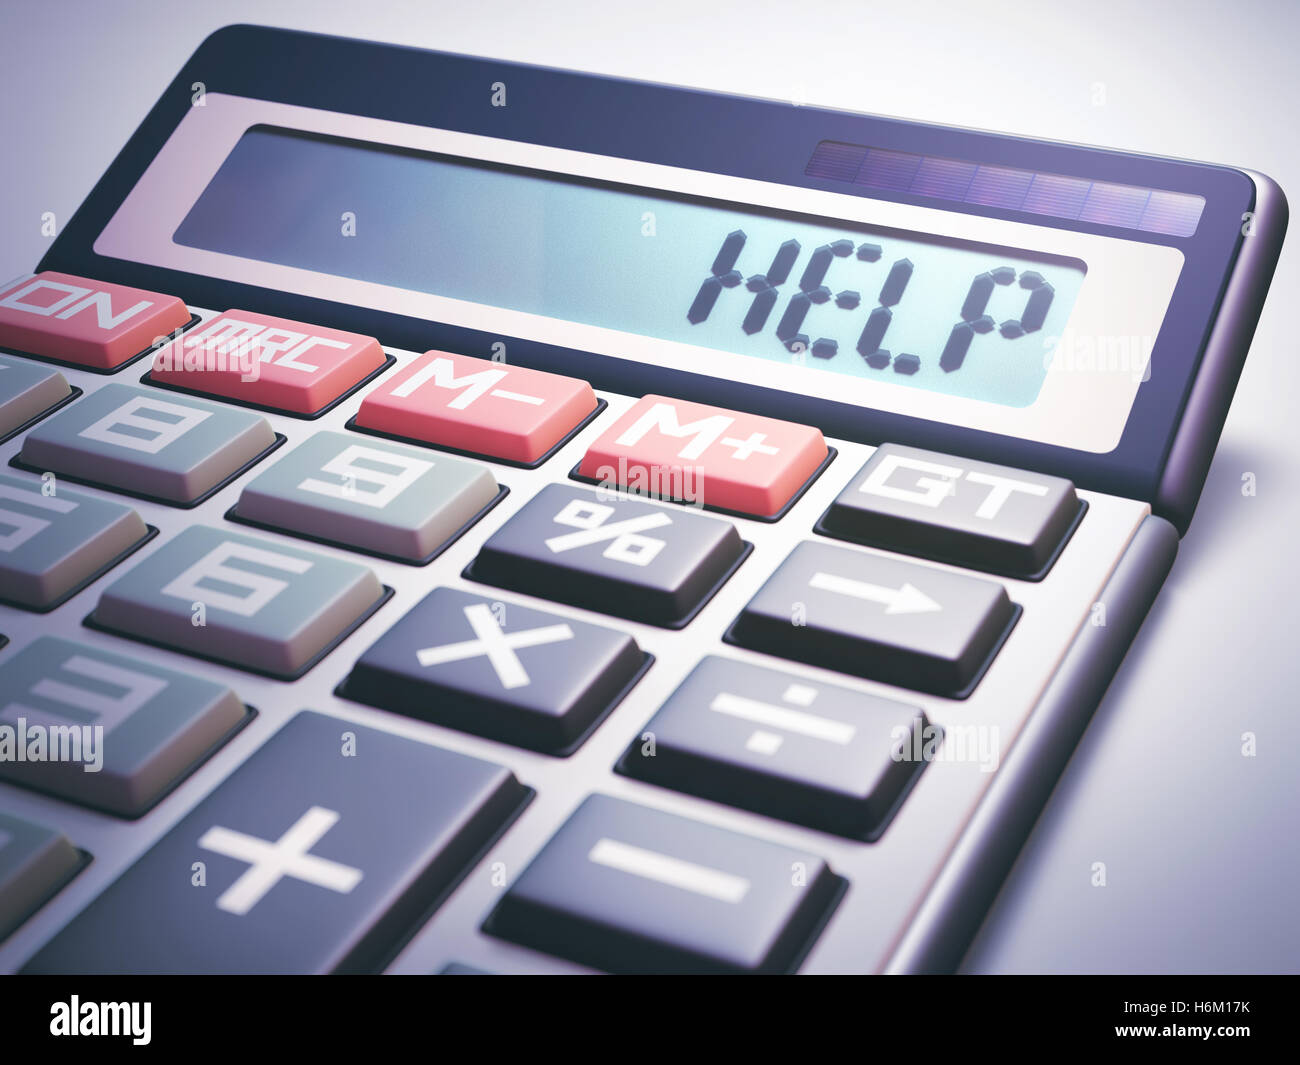 Solar calculator showing on the digital display the word 'HELP'. Stock Photo